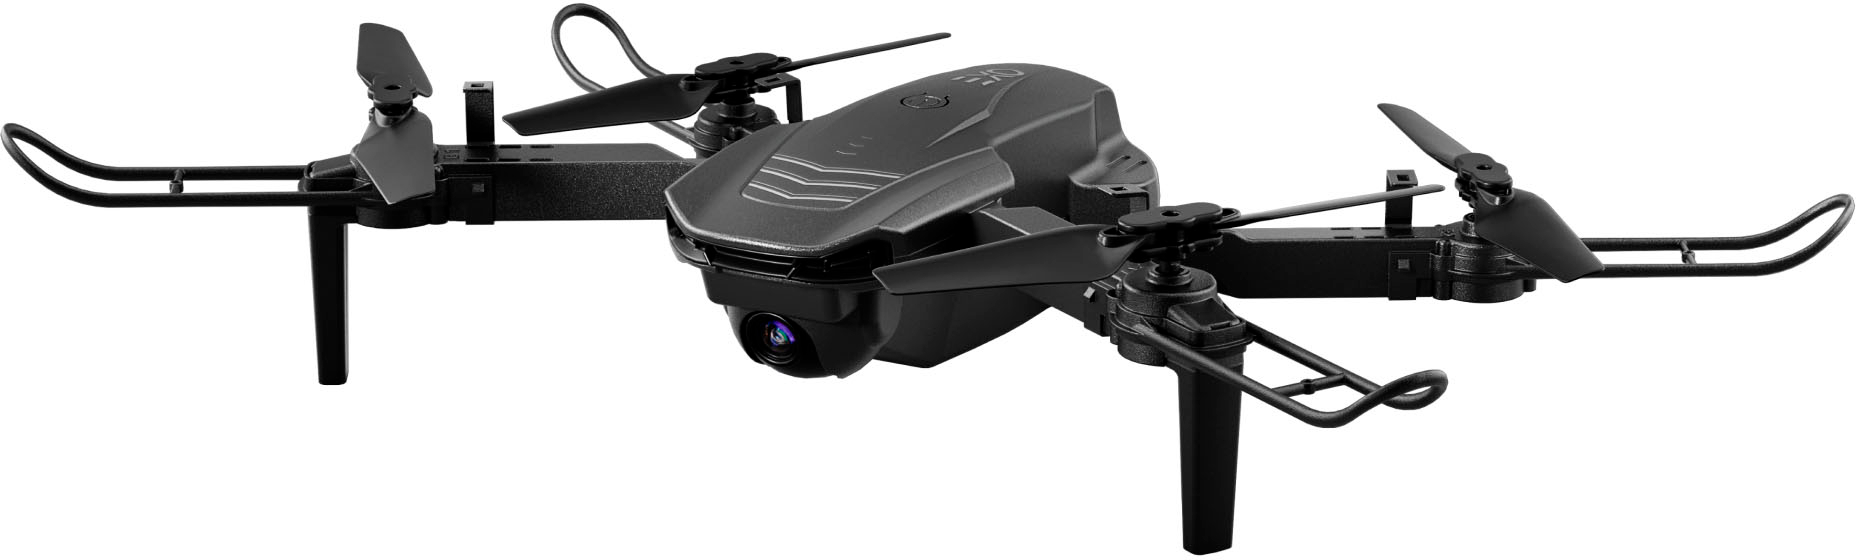 Angle View: EXO Drones - Recon Drone and Remote Control (Android and iOS compatible) - Black